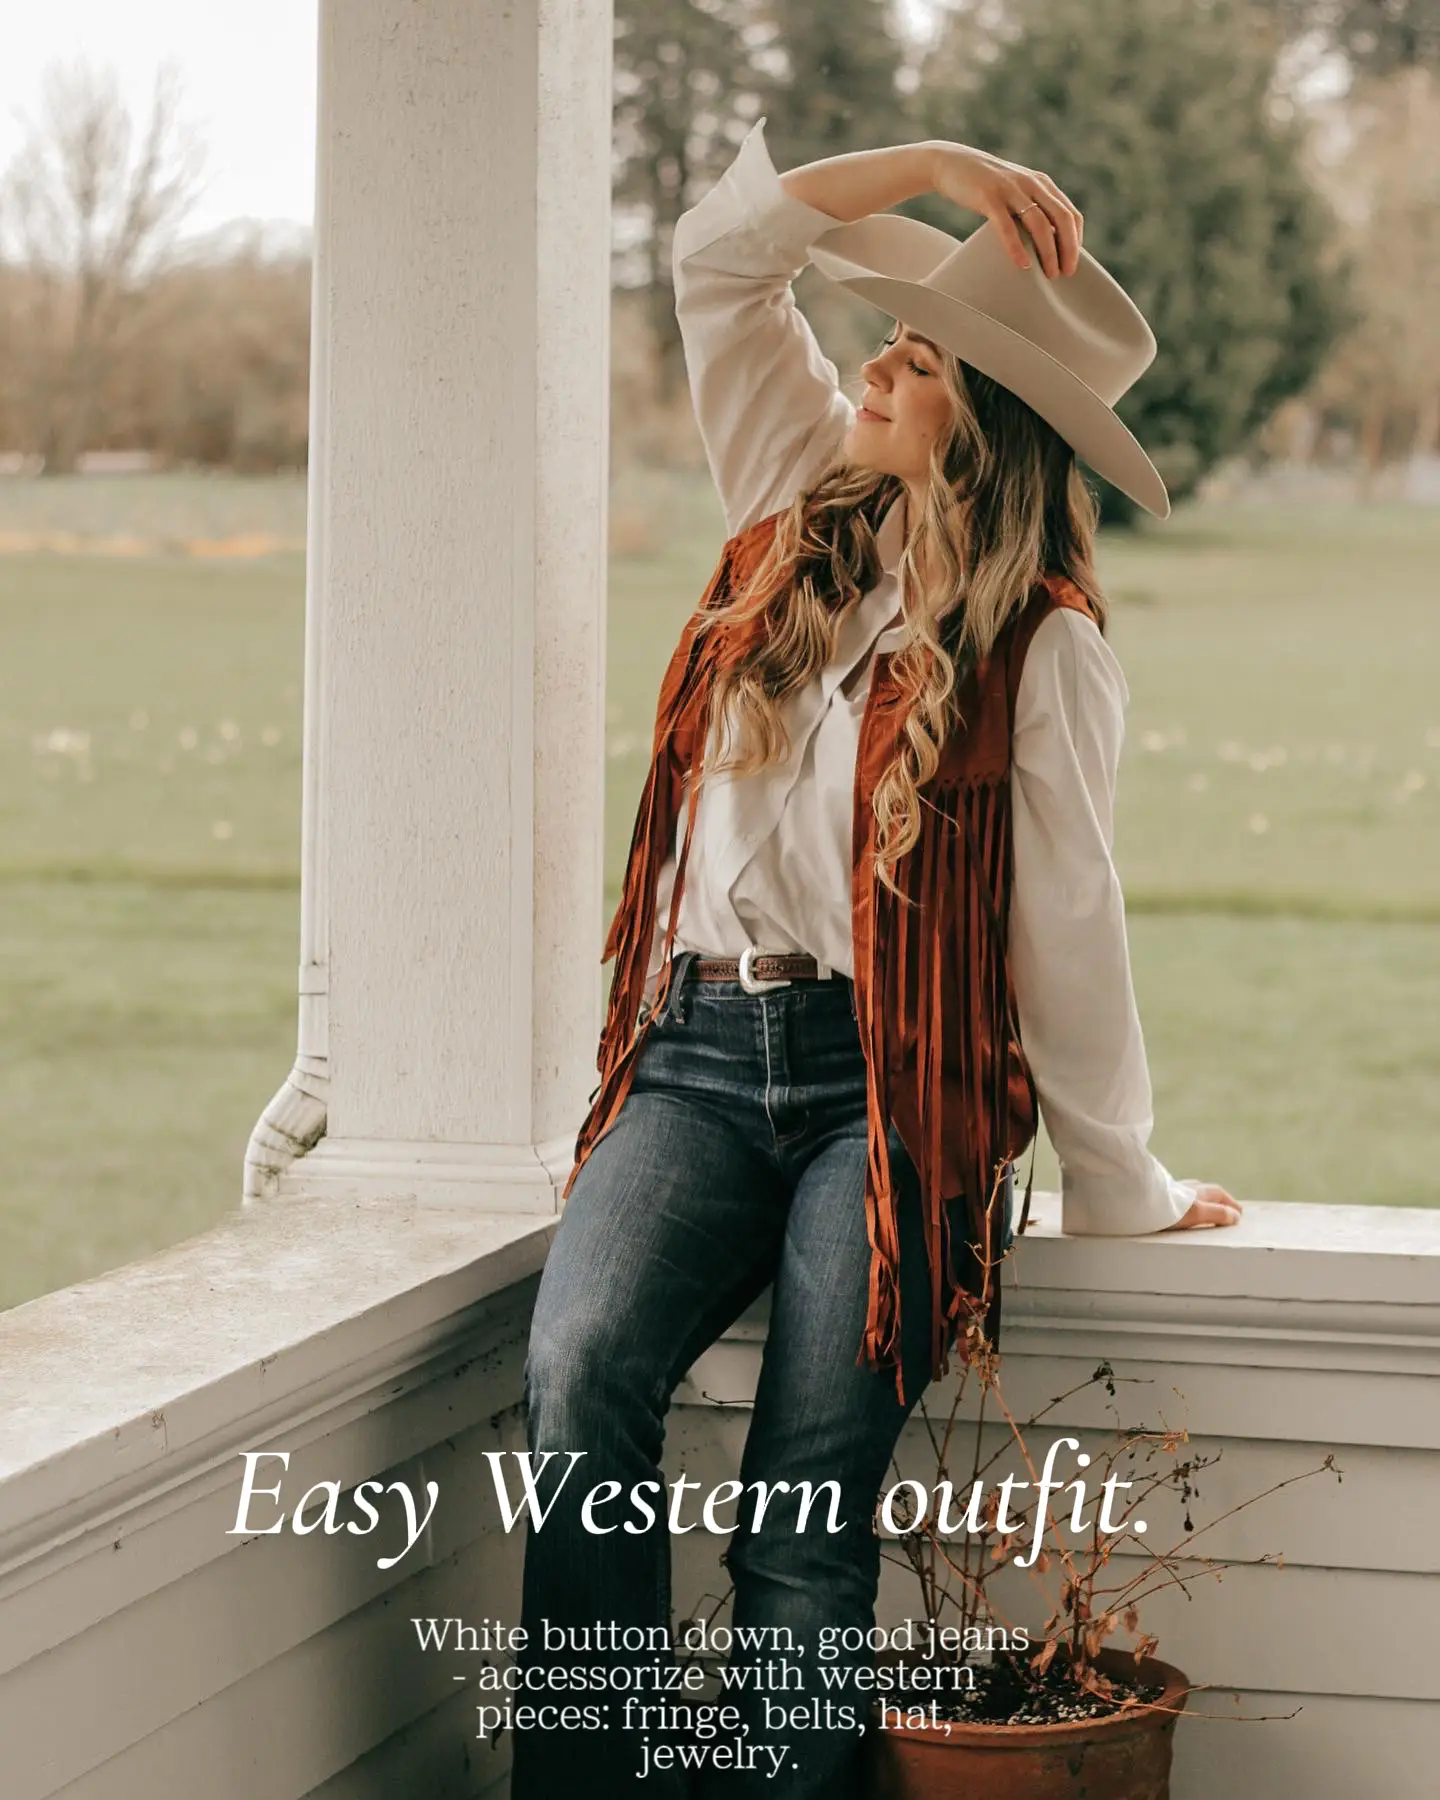 5 Western Fashion Outfits That Give Off Big Yeehaw Energy - Yahoo